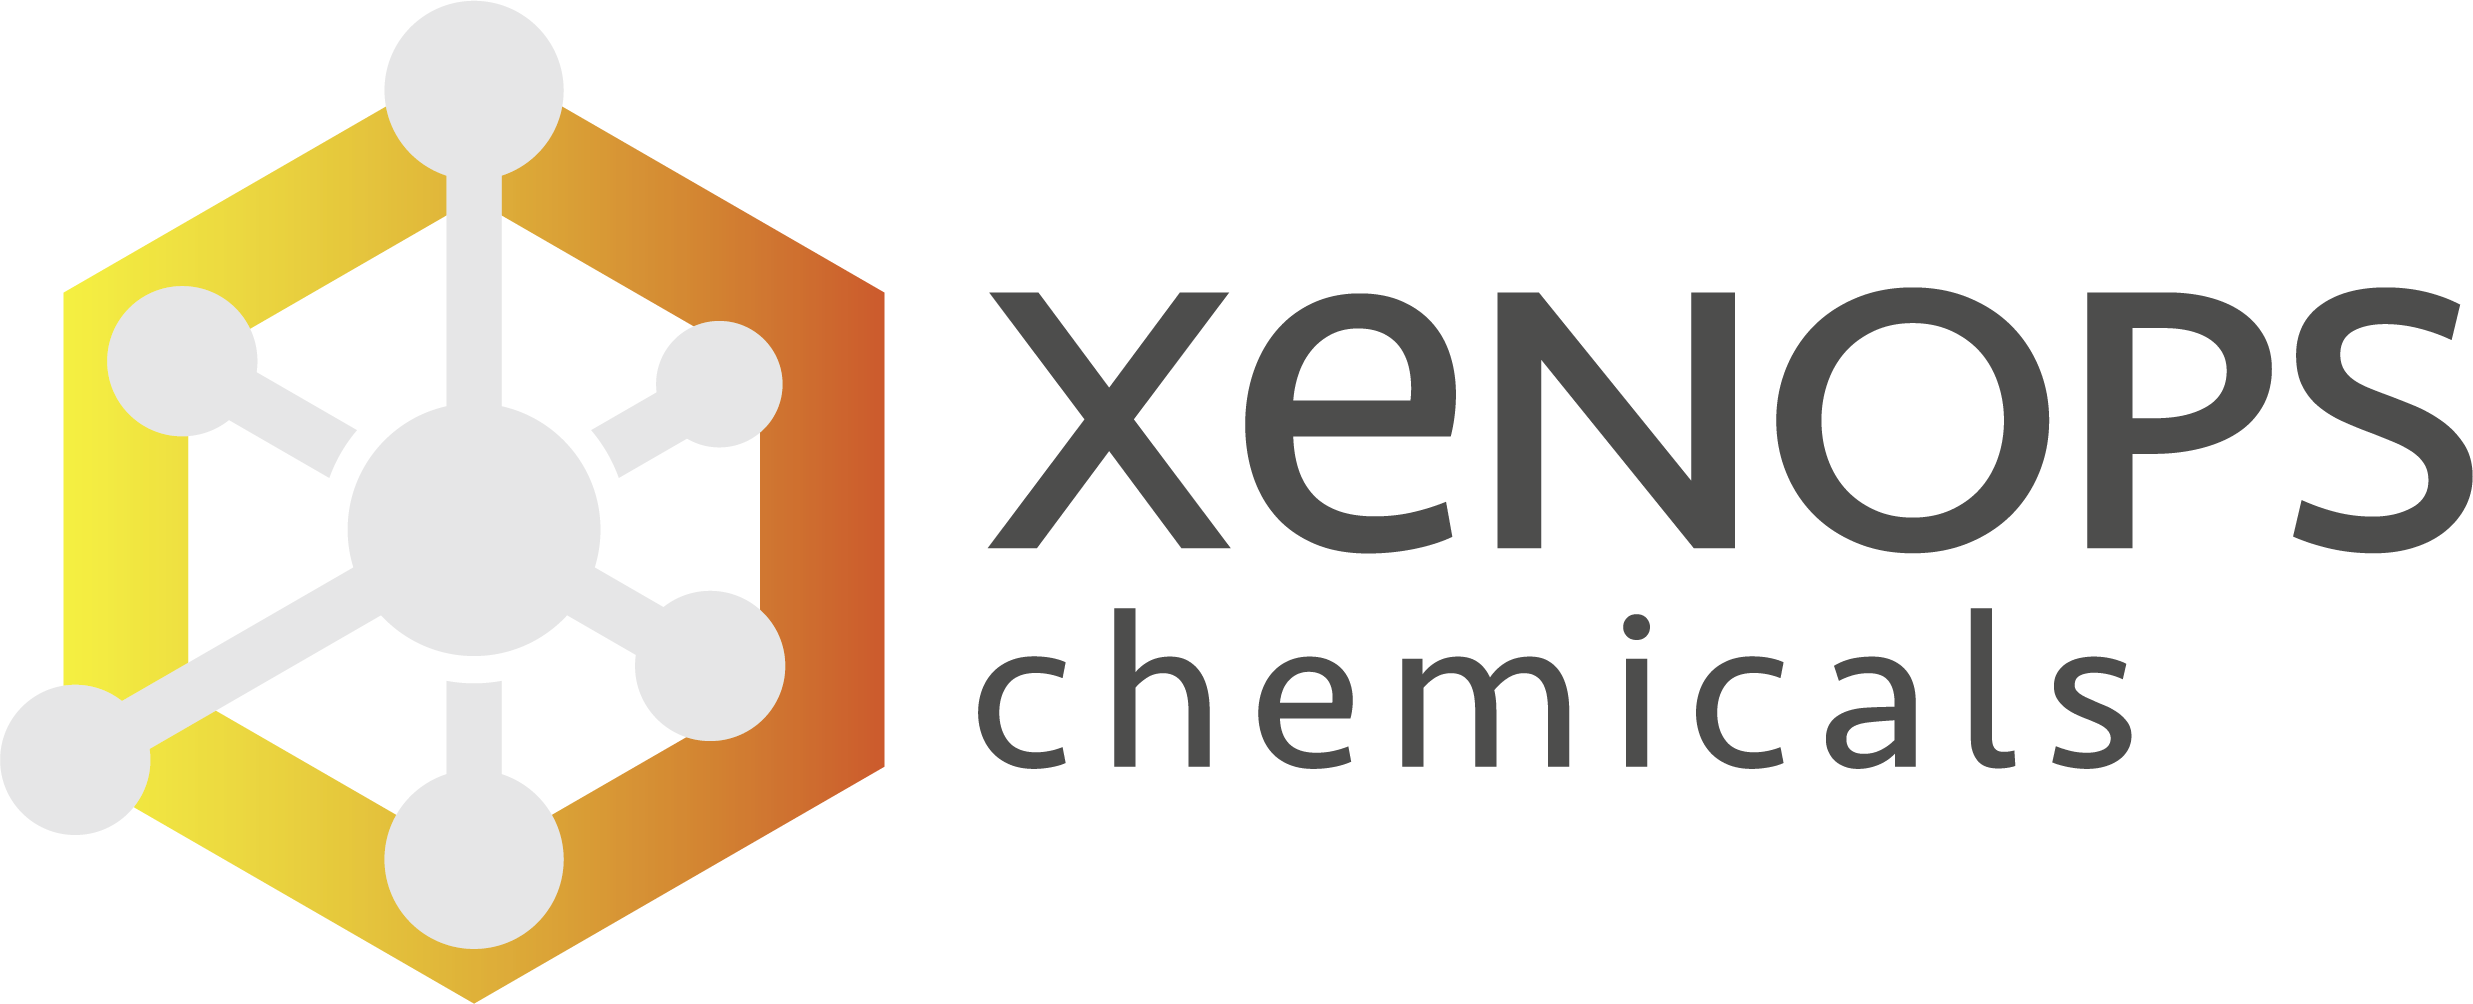 XENOPS Chemicals